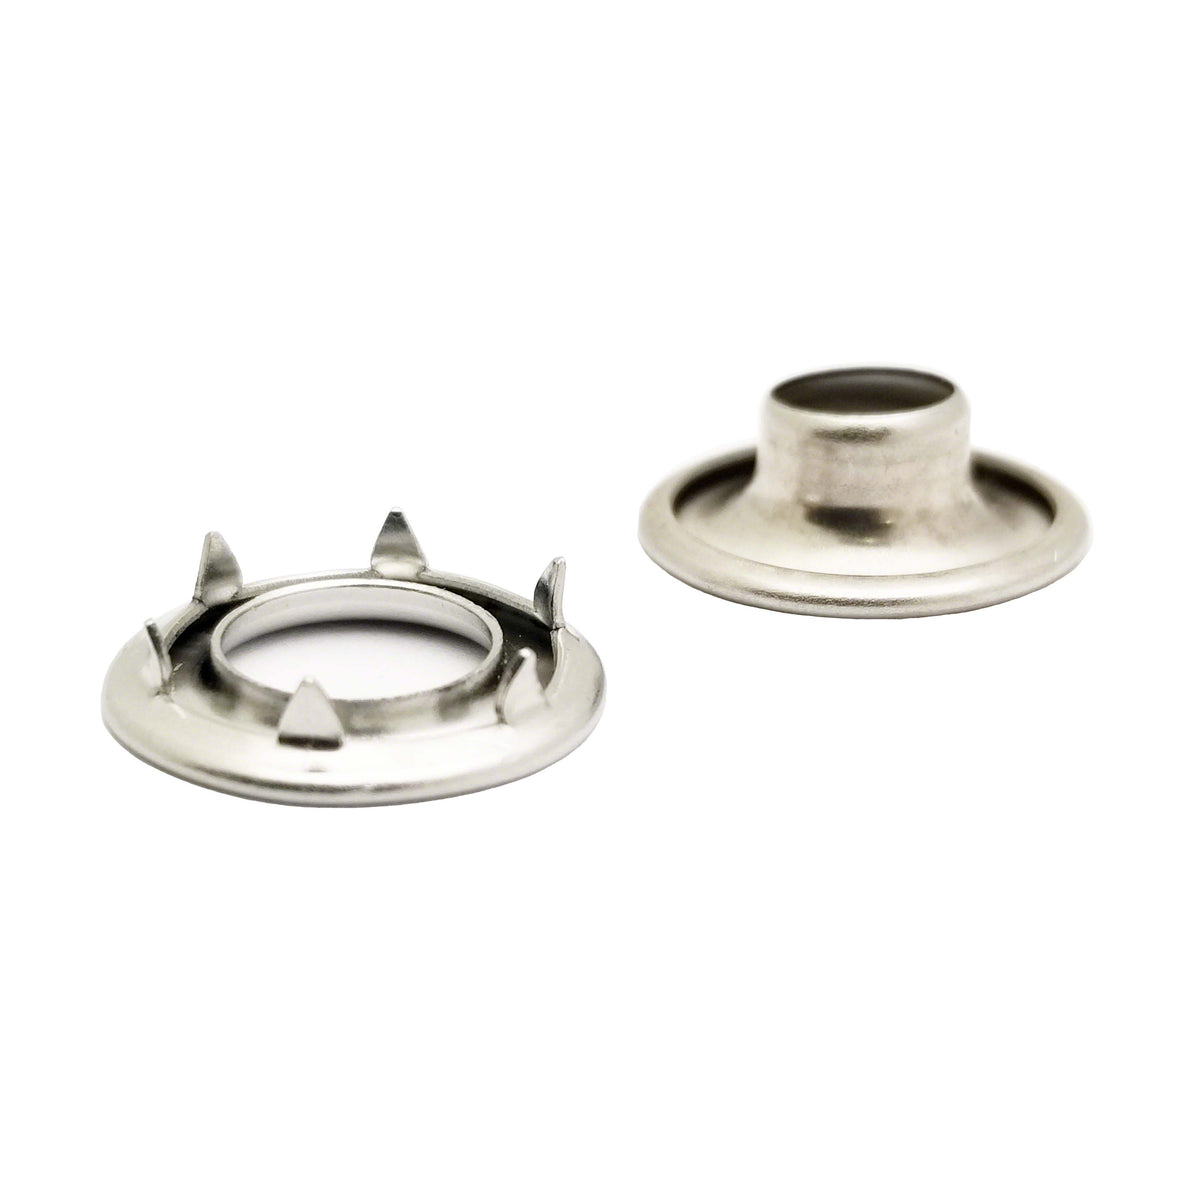 Stainless Steel vs. Nickel-Plated Brass Grommets — Which One Do I